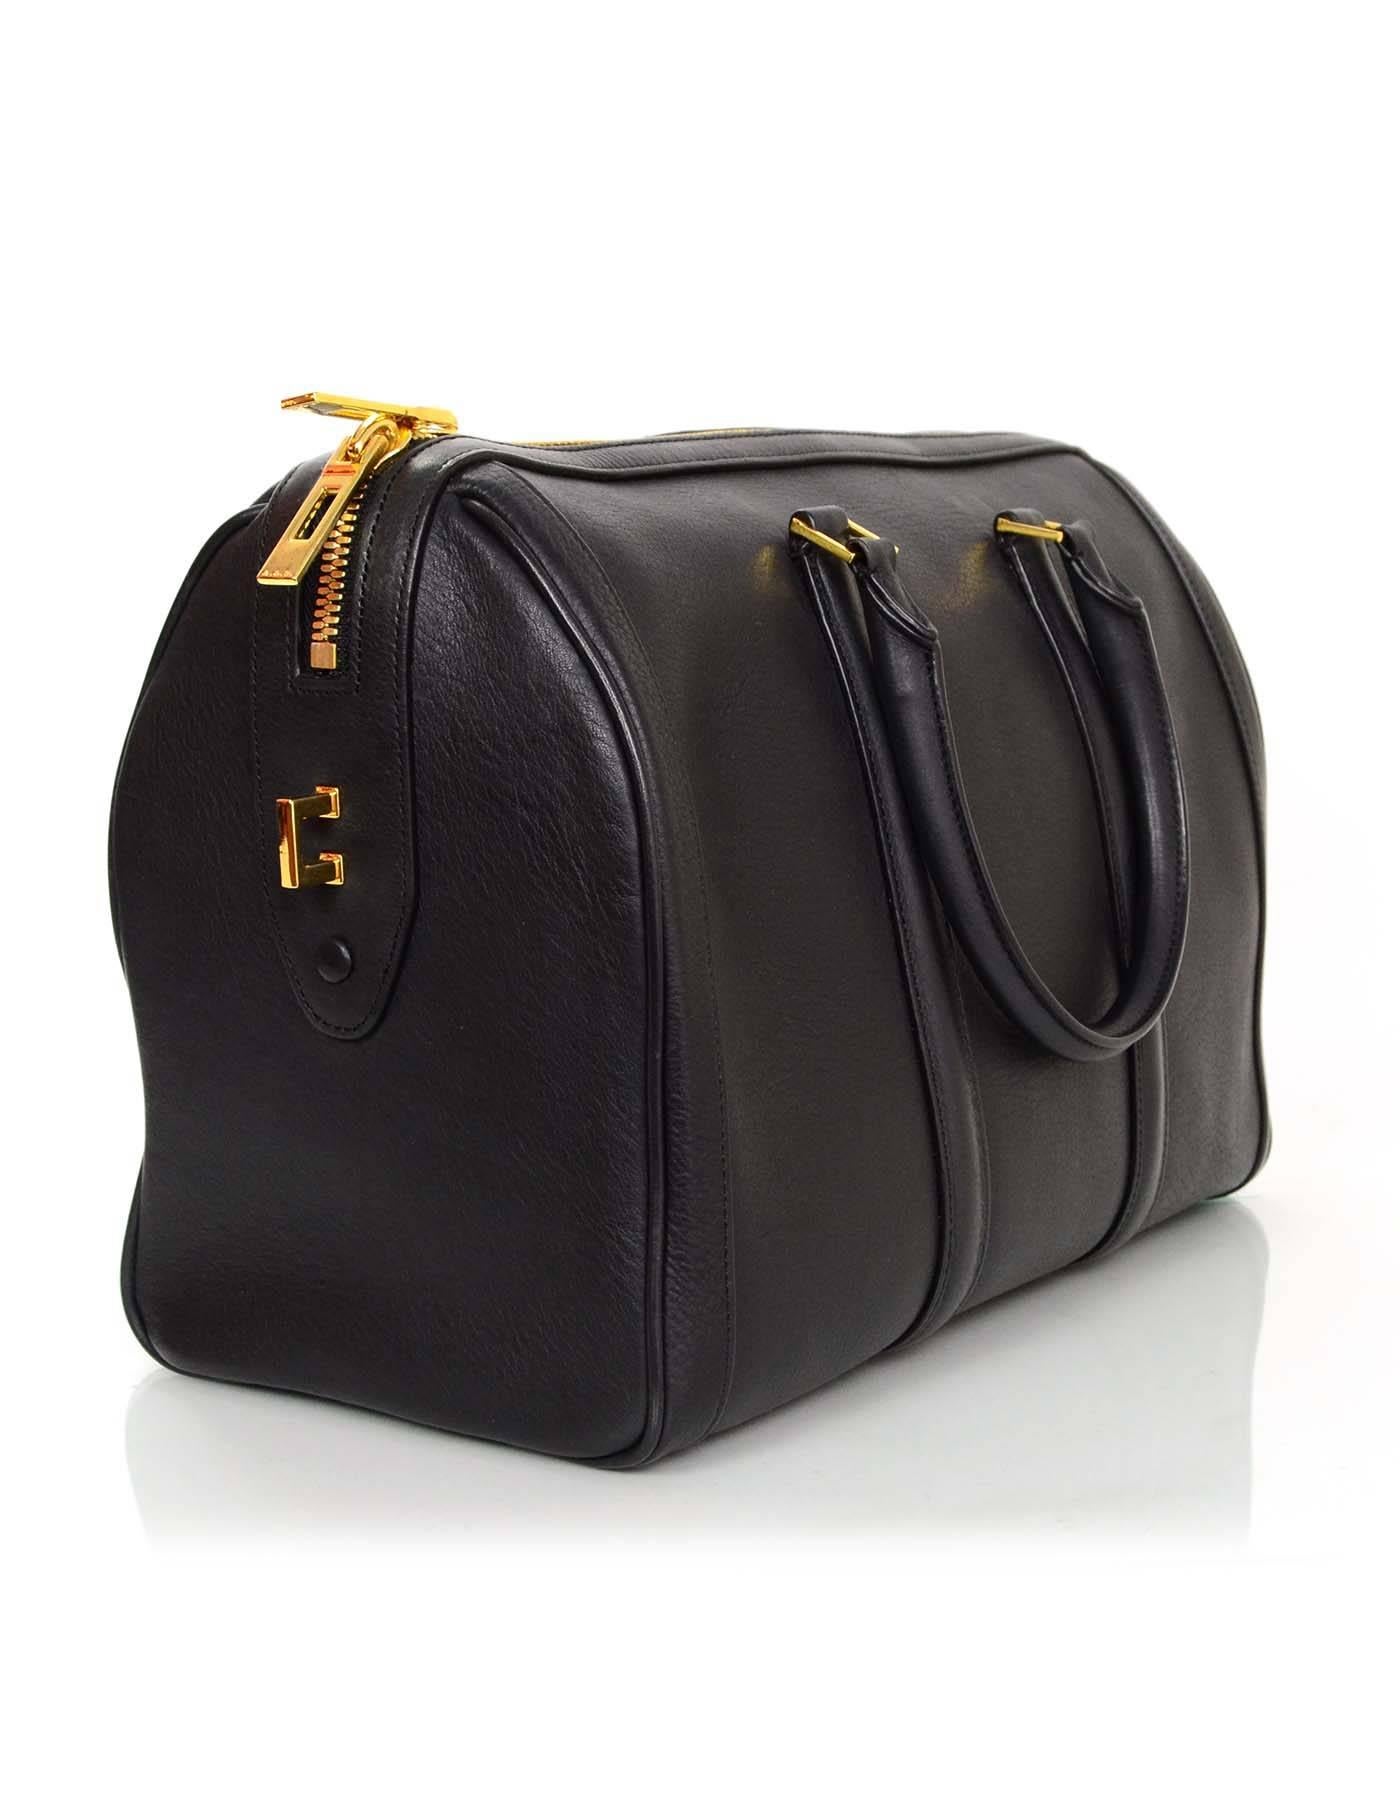 A.L.C. Black Leather Bowler Bag

Made In: China
Color: Black
Hardware: Goldtone
Materials: Leather and metal
Lining: Black textile
Closure/Opening: Double zip top closure
Exterior Pockets: One at side
Interior Pockets: One wall pocket and